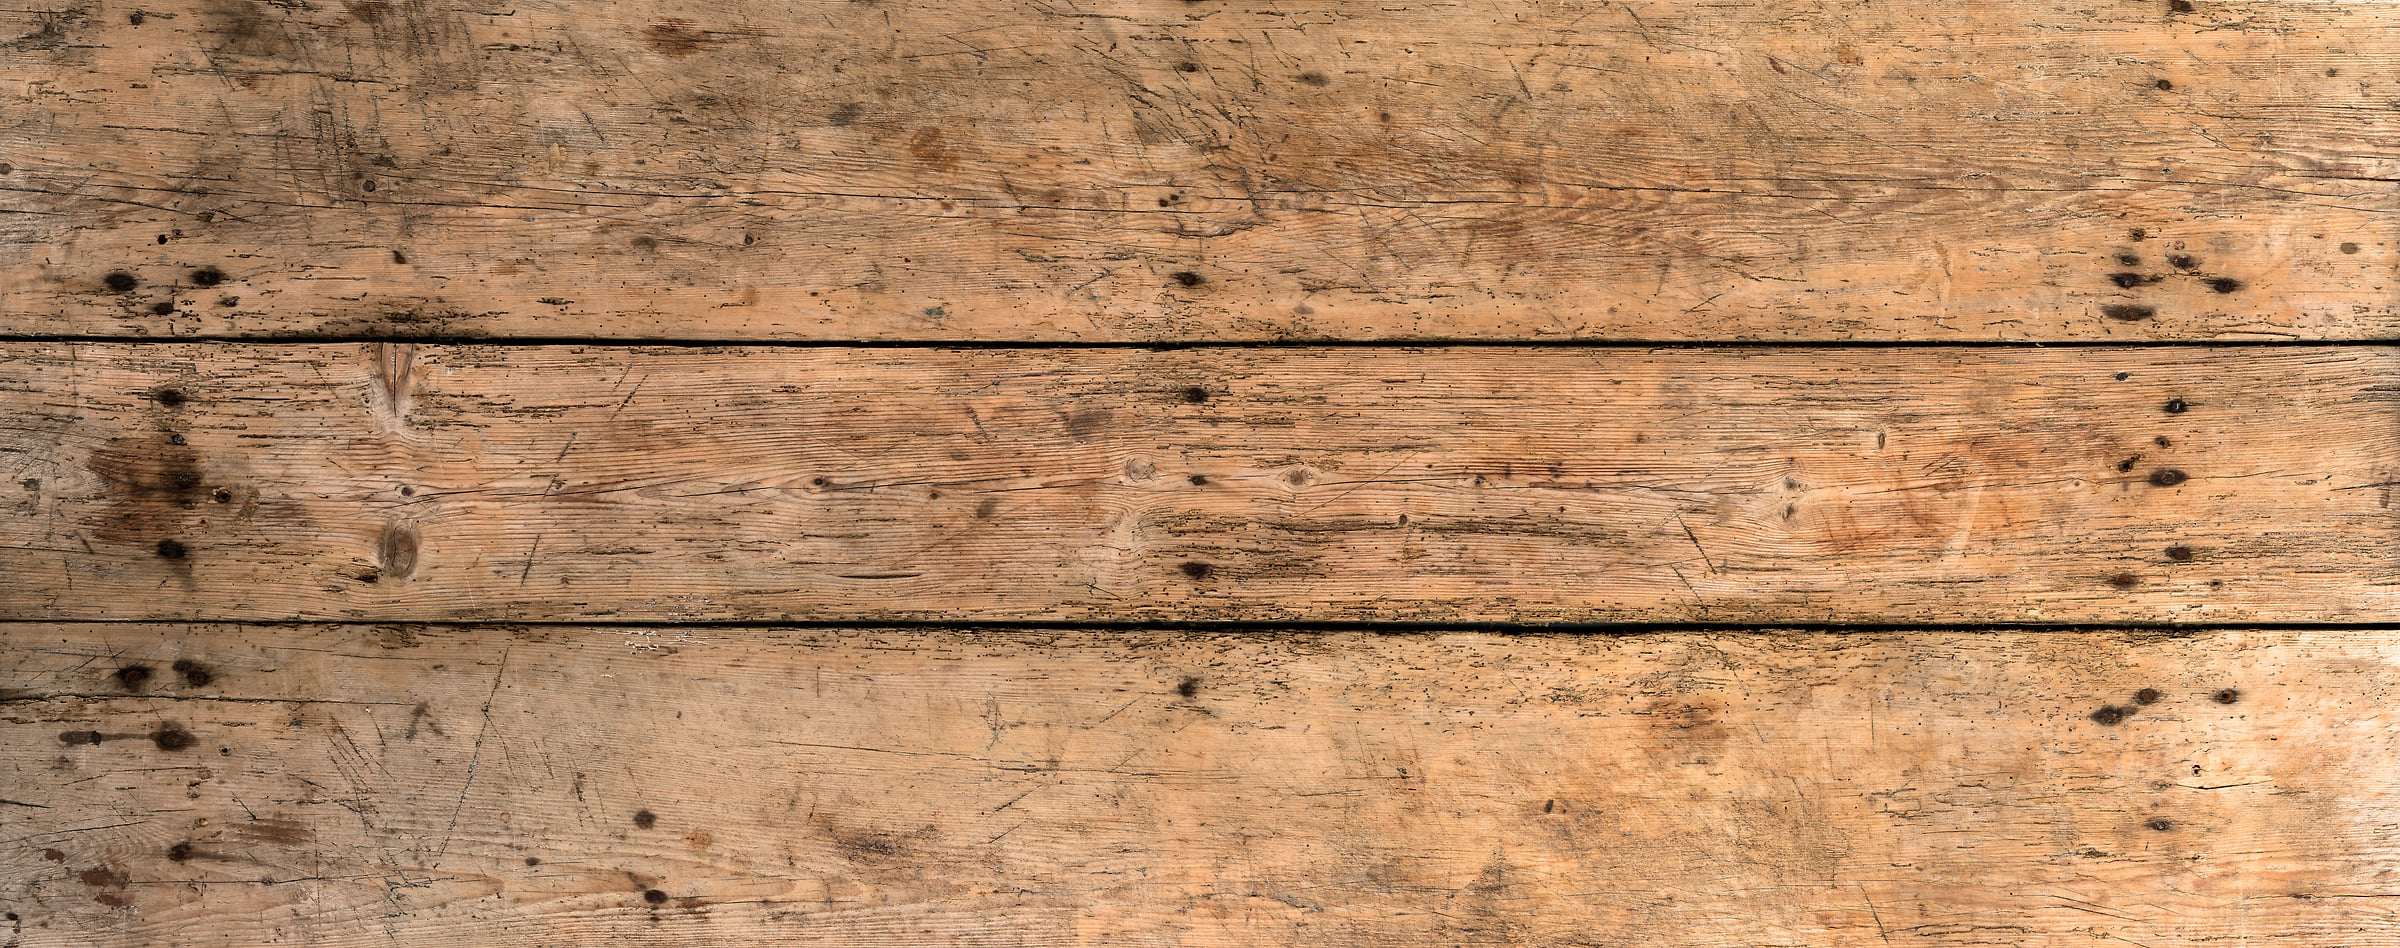 1,566 megapixels! An ultra-high-resolution texture photo file of three distressed wooden planks; gigapixel photograph created by David Lineton.